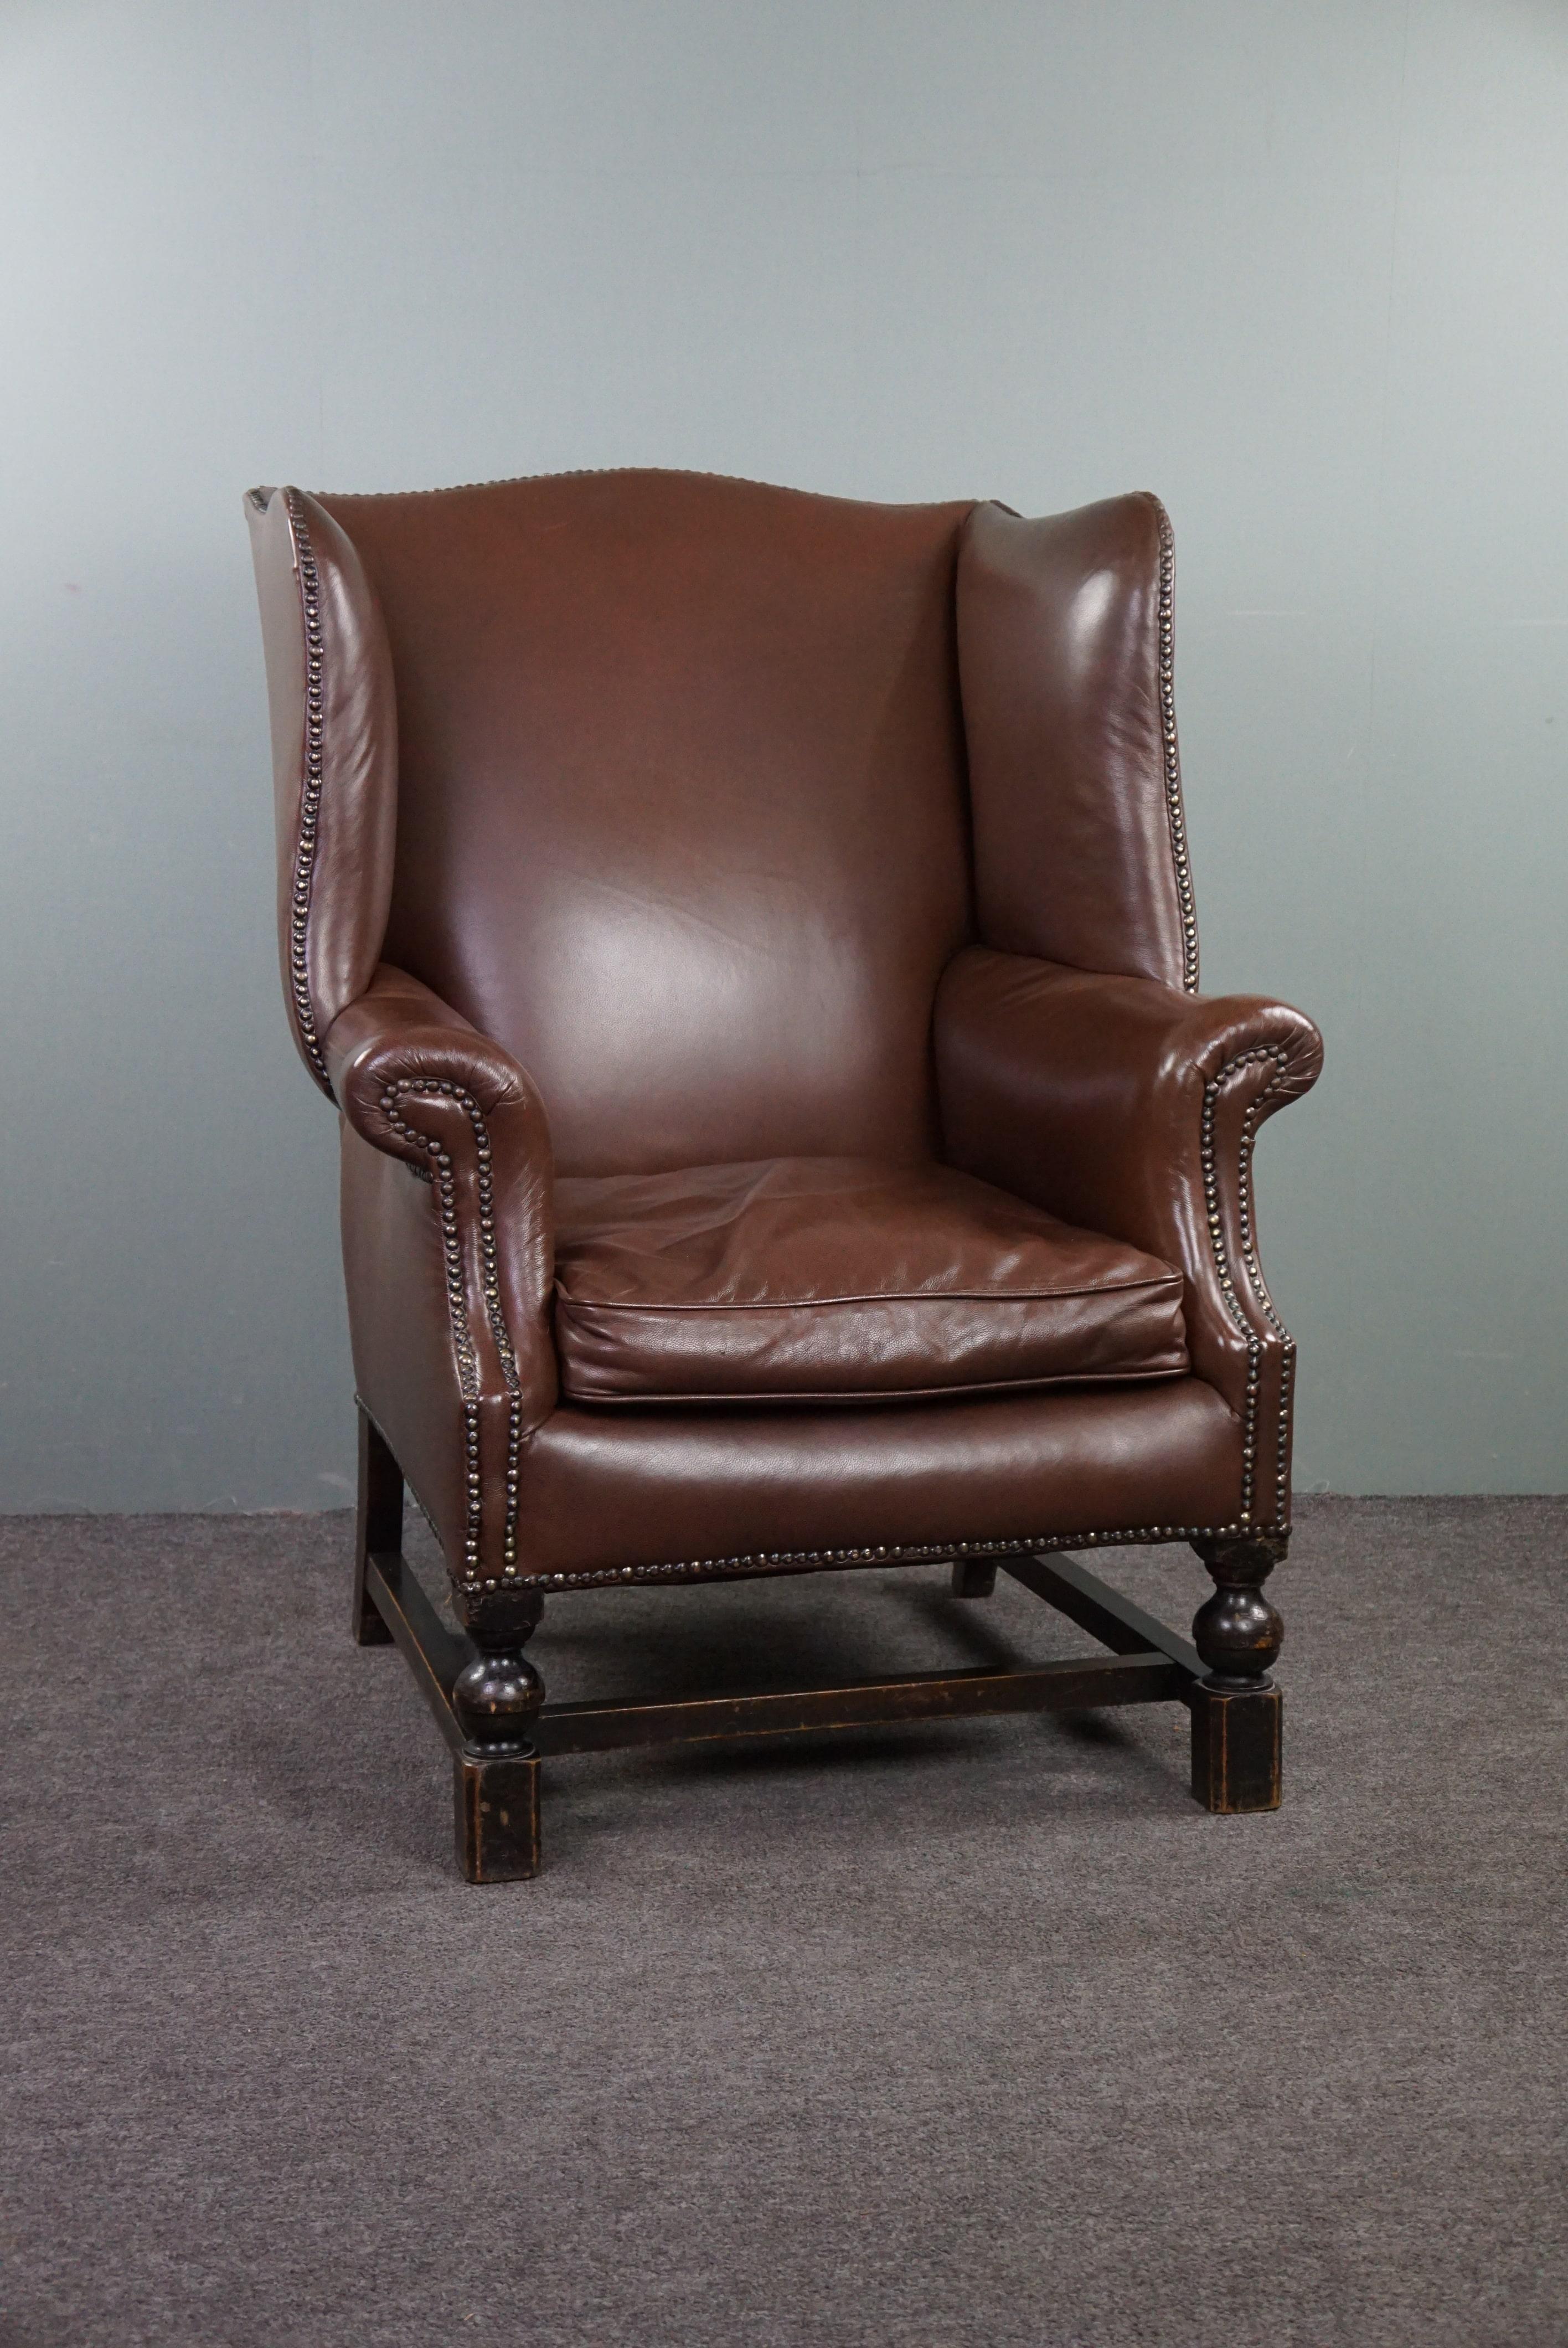 With pleasure, we present to you this comfortable leather wingback chair.

If you are looking for an elegant wingback chair with exceptional comfort, this deep-colored wingback chair could be the ideal choice for you. This chair combines style and